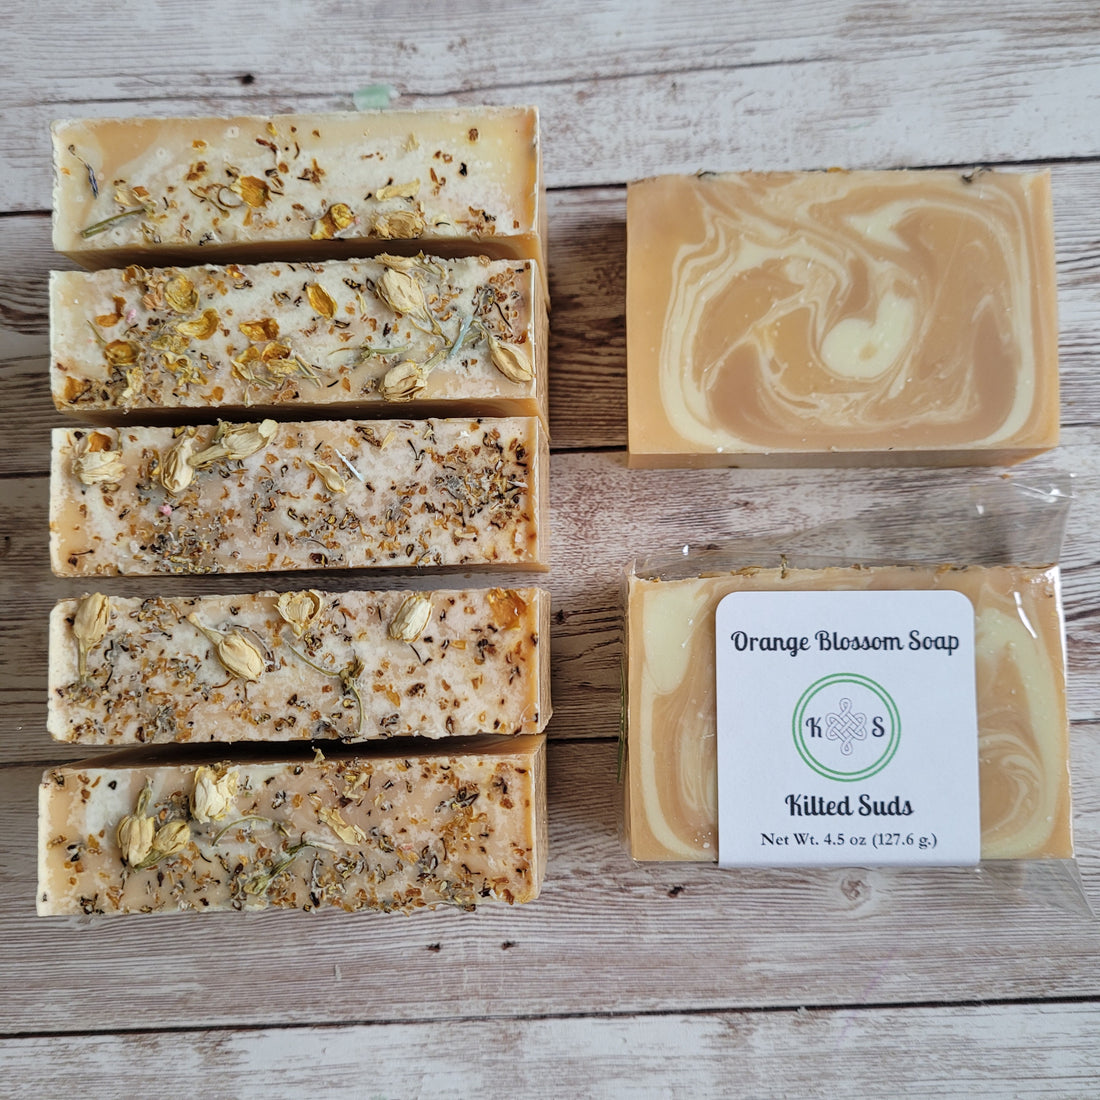 Revitalize with Kilted Suds Orange Blossom Soap!